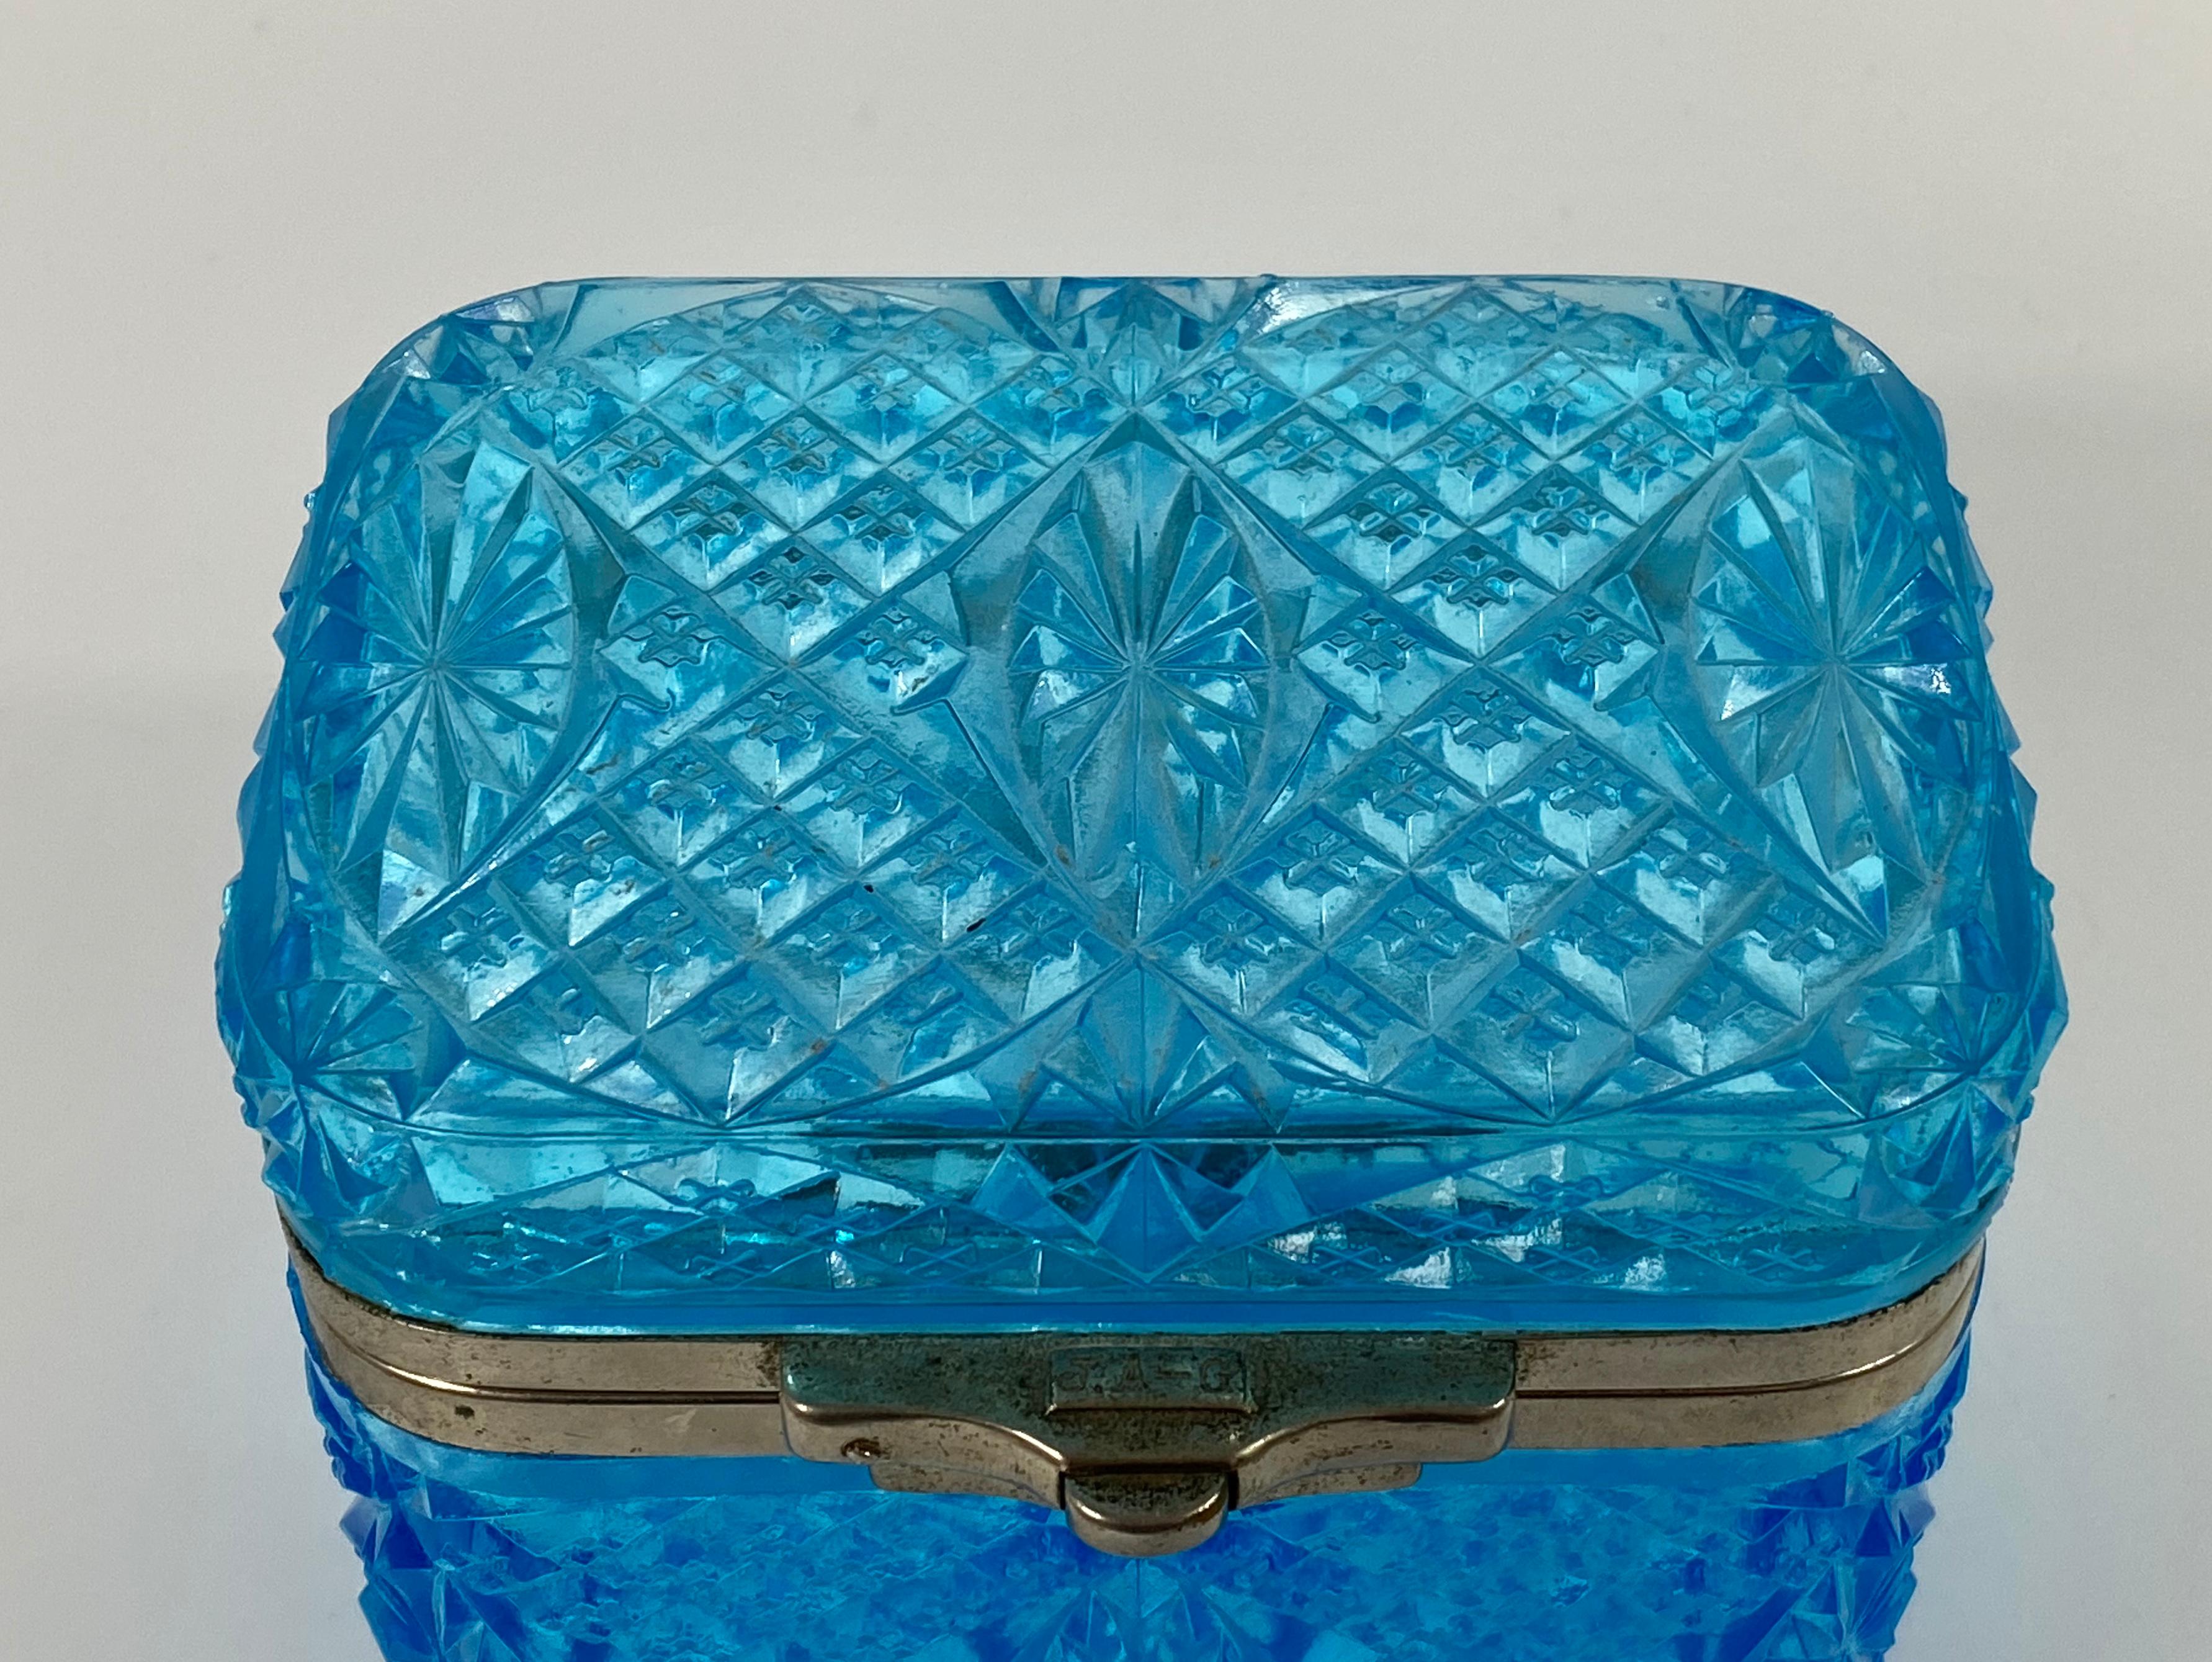 £390.00
Maltsev Glassworks casket, Russia, c. 1910. The aquamarine blue colored casket decorated with diamond point surrounding panels of stylized flower heads.
Having a plated metal mount, with the inscription ‘J.A-G’ to the clasp.
Medium: